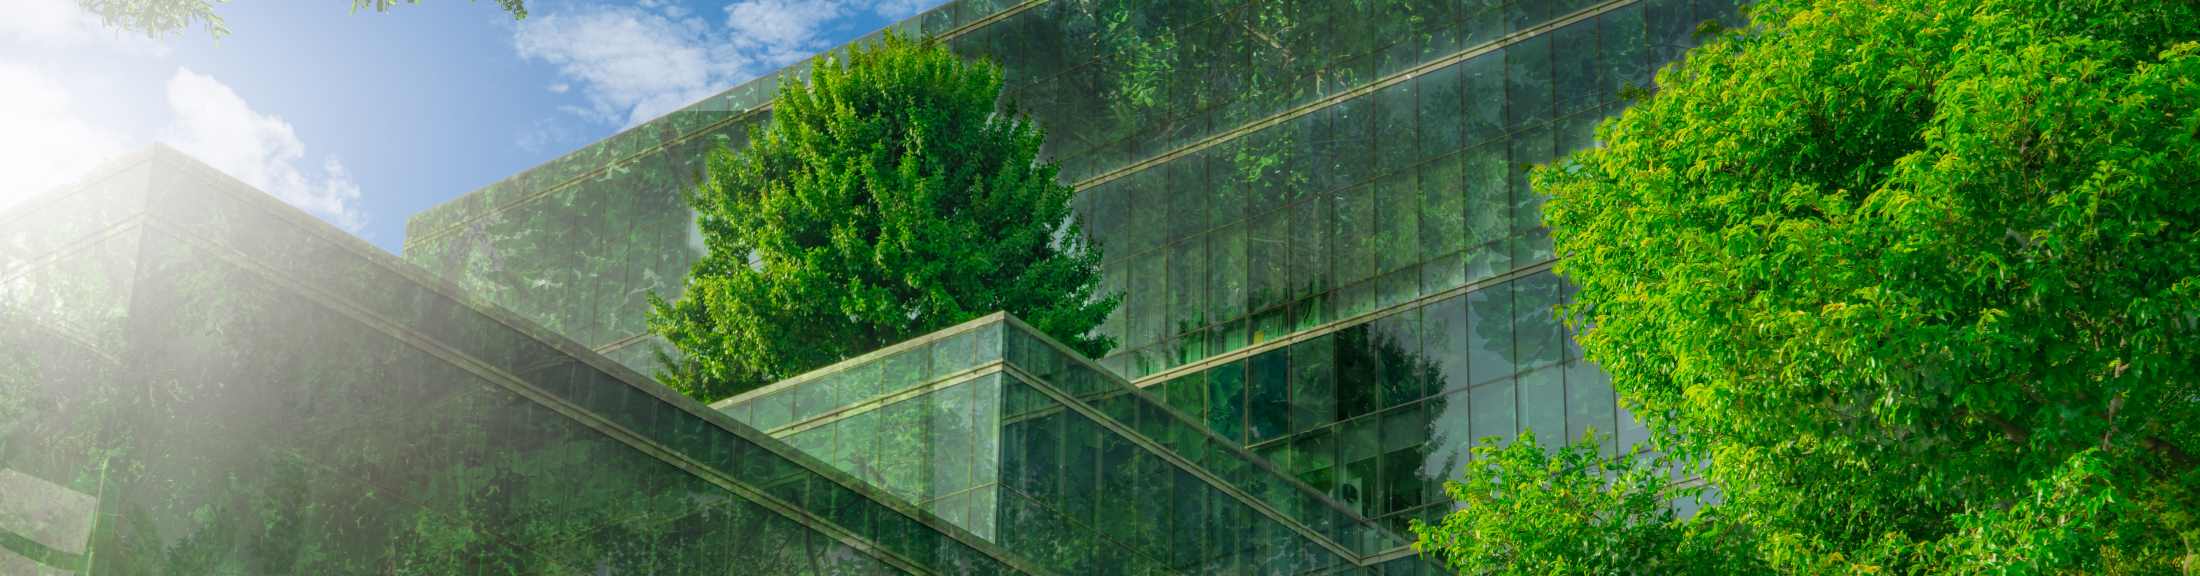 Eco-friendly building with vertical garden in modern city. Green tree forest on sustainable glass building. Energy-saving architecture with vertical garden. Office building with green environment.